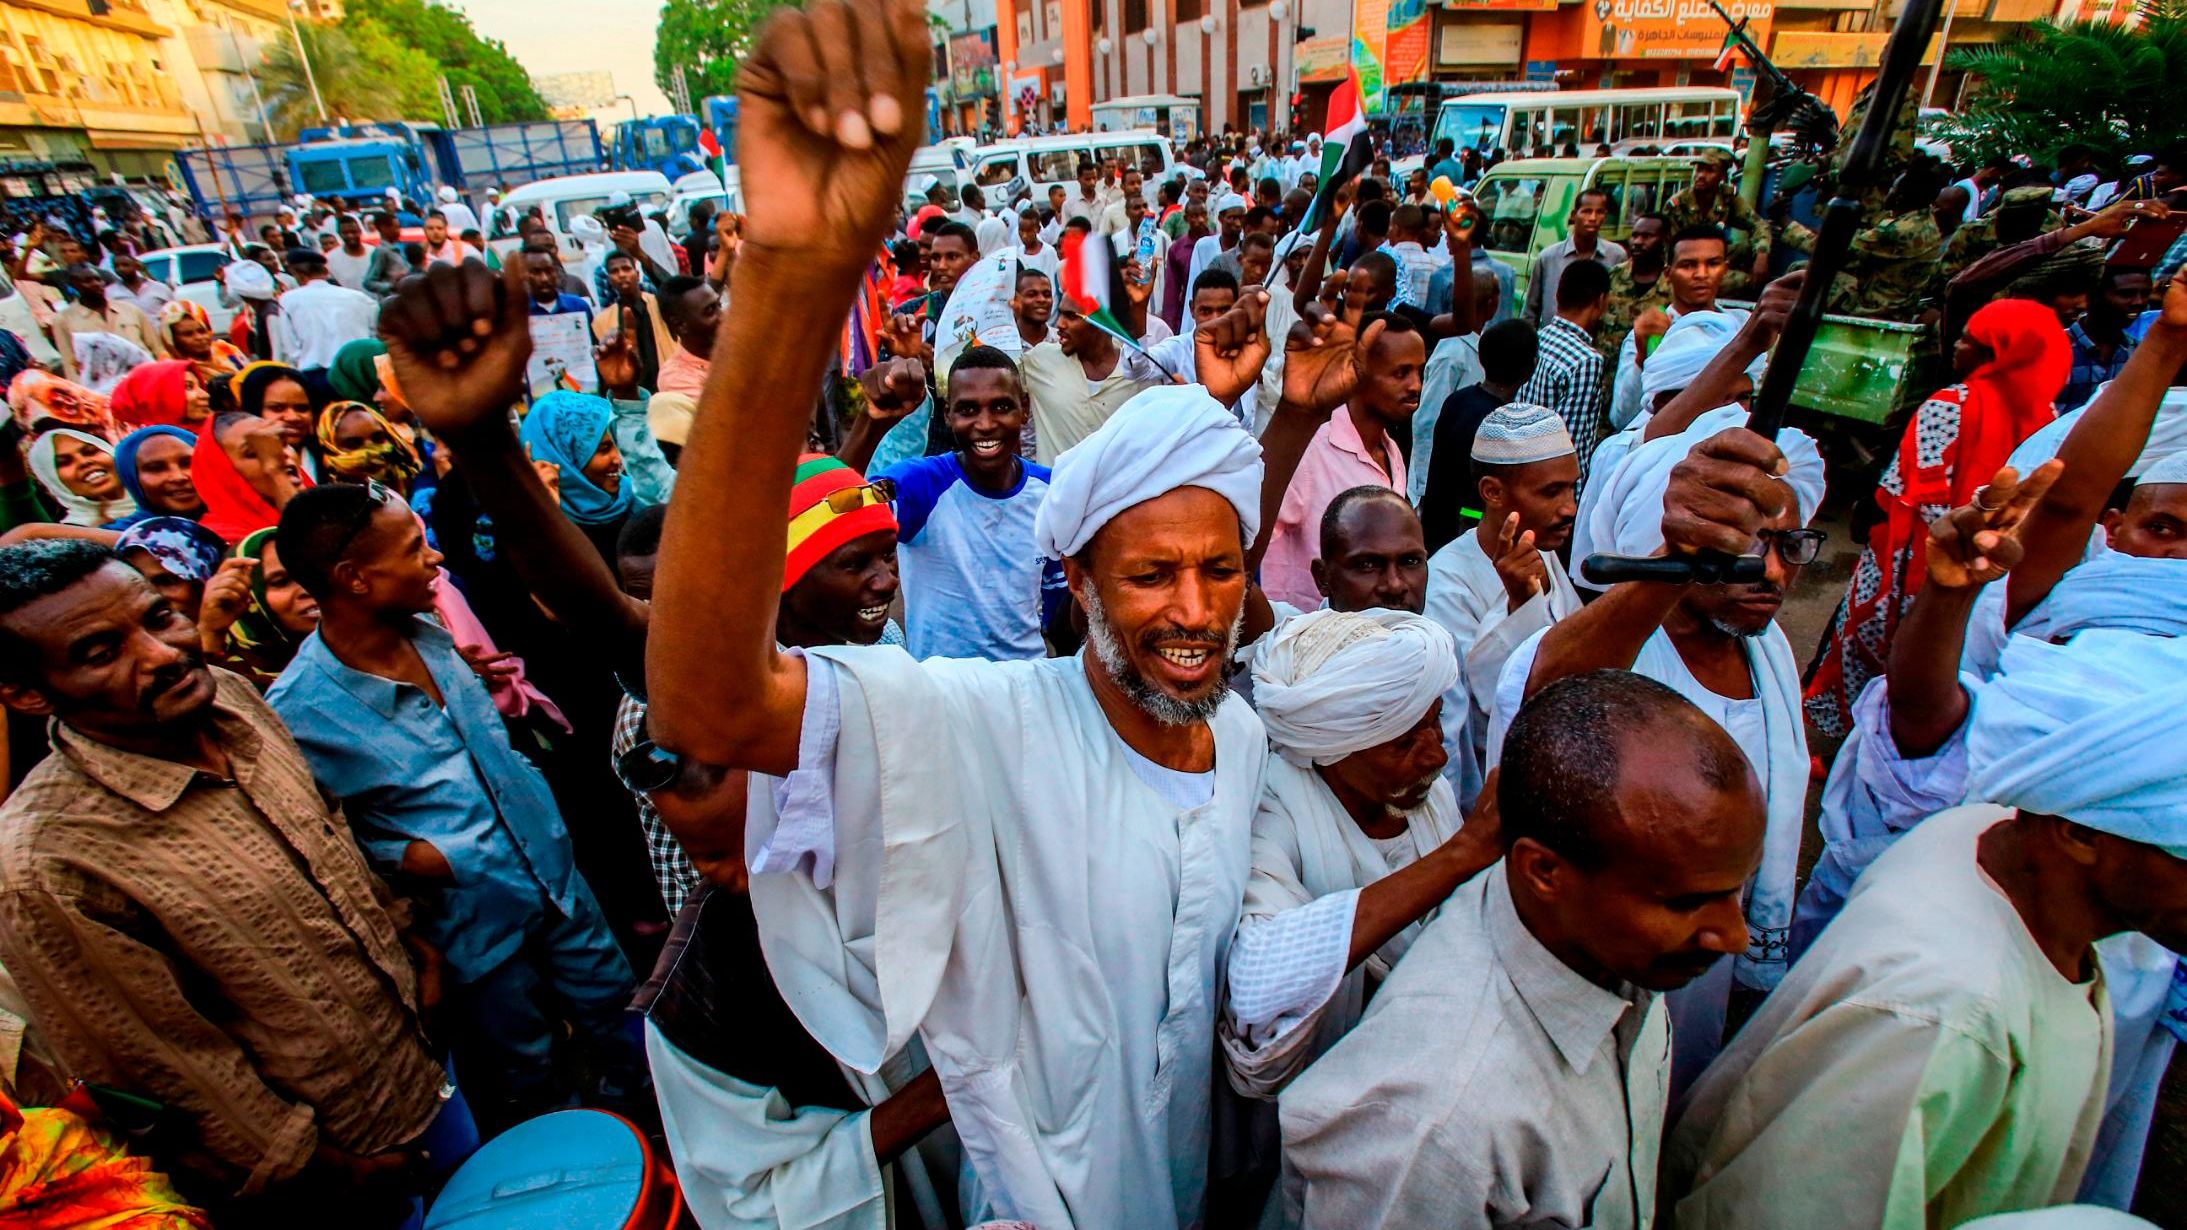 Sudanese supporters of the ruling Transitional Military Council chant slogans during a rally in the capital Khartoum on May 31.